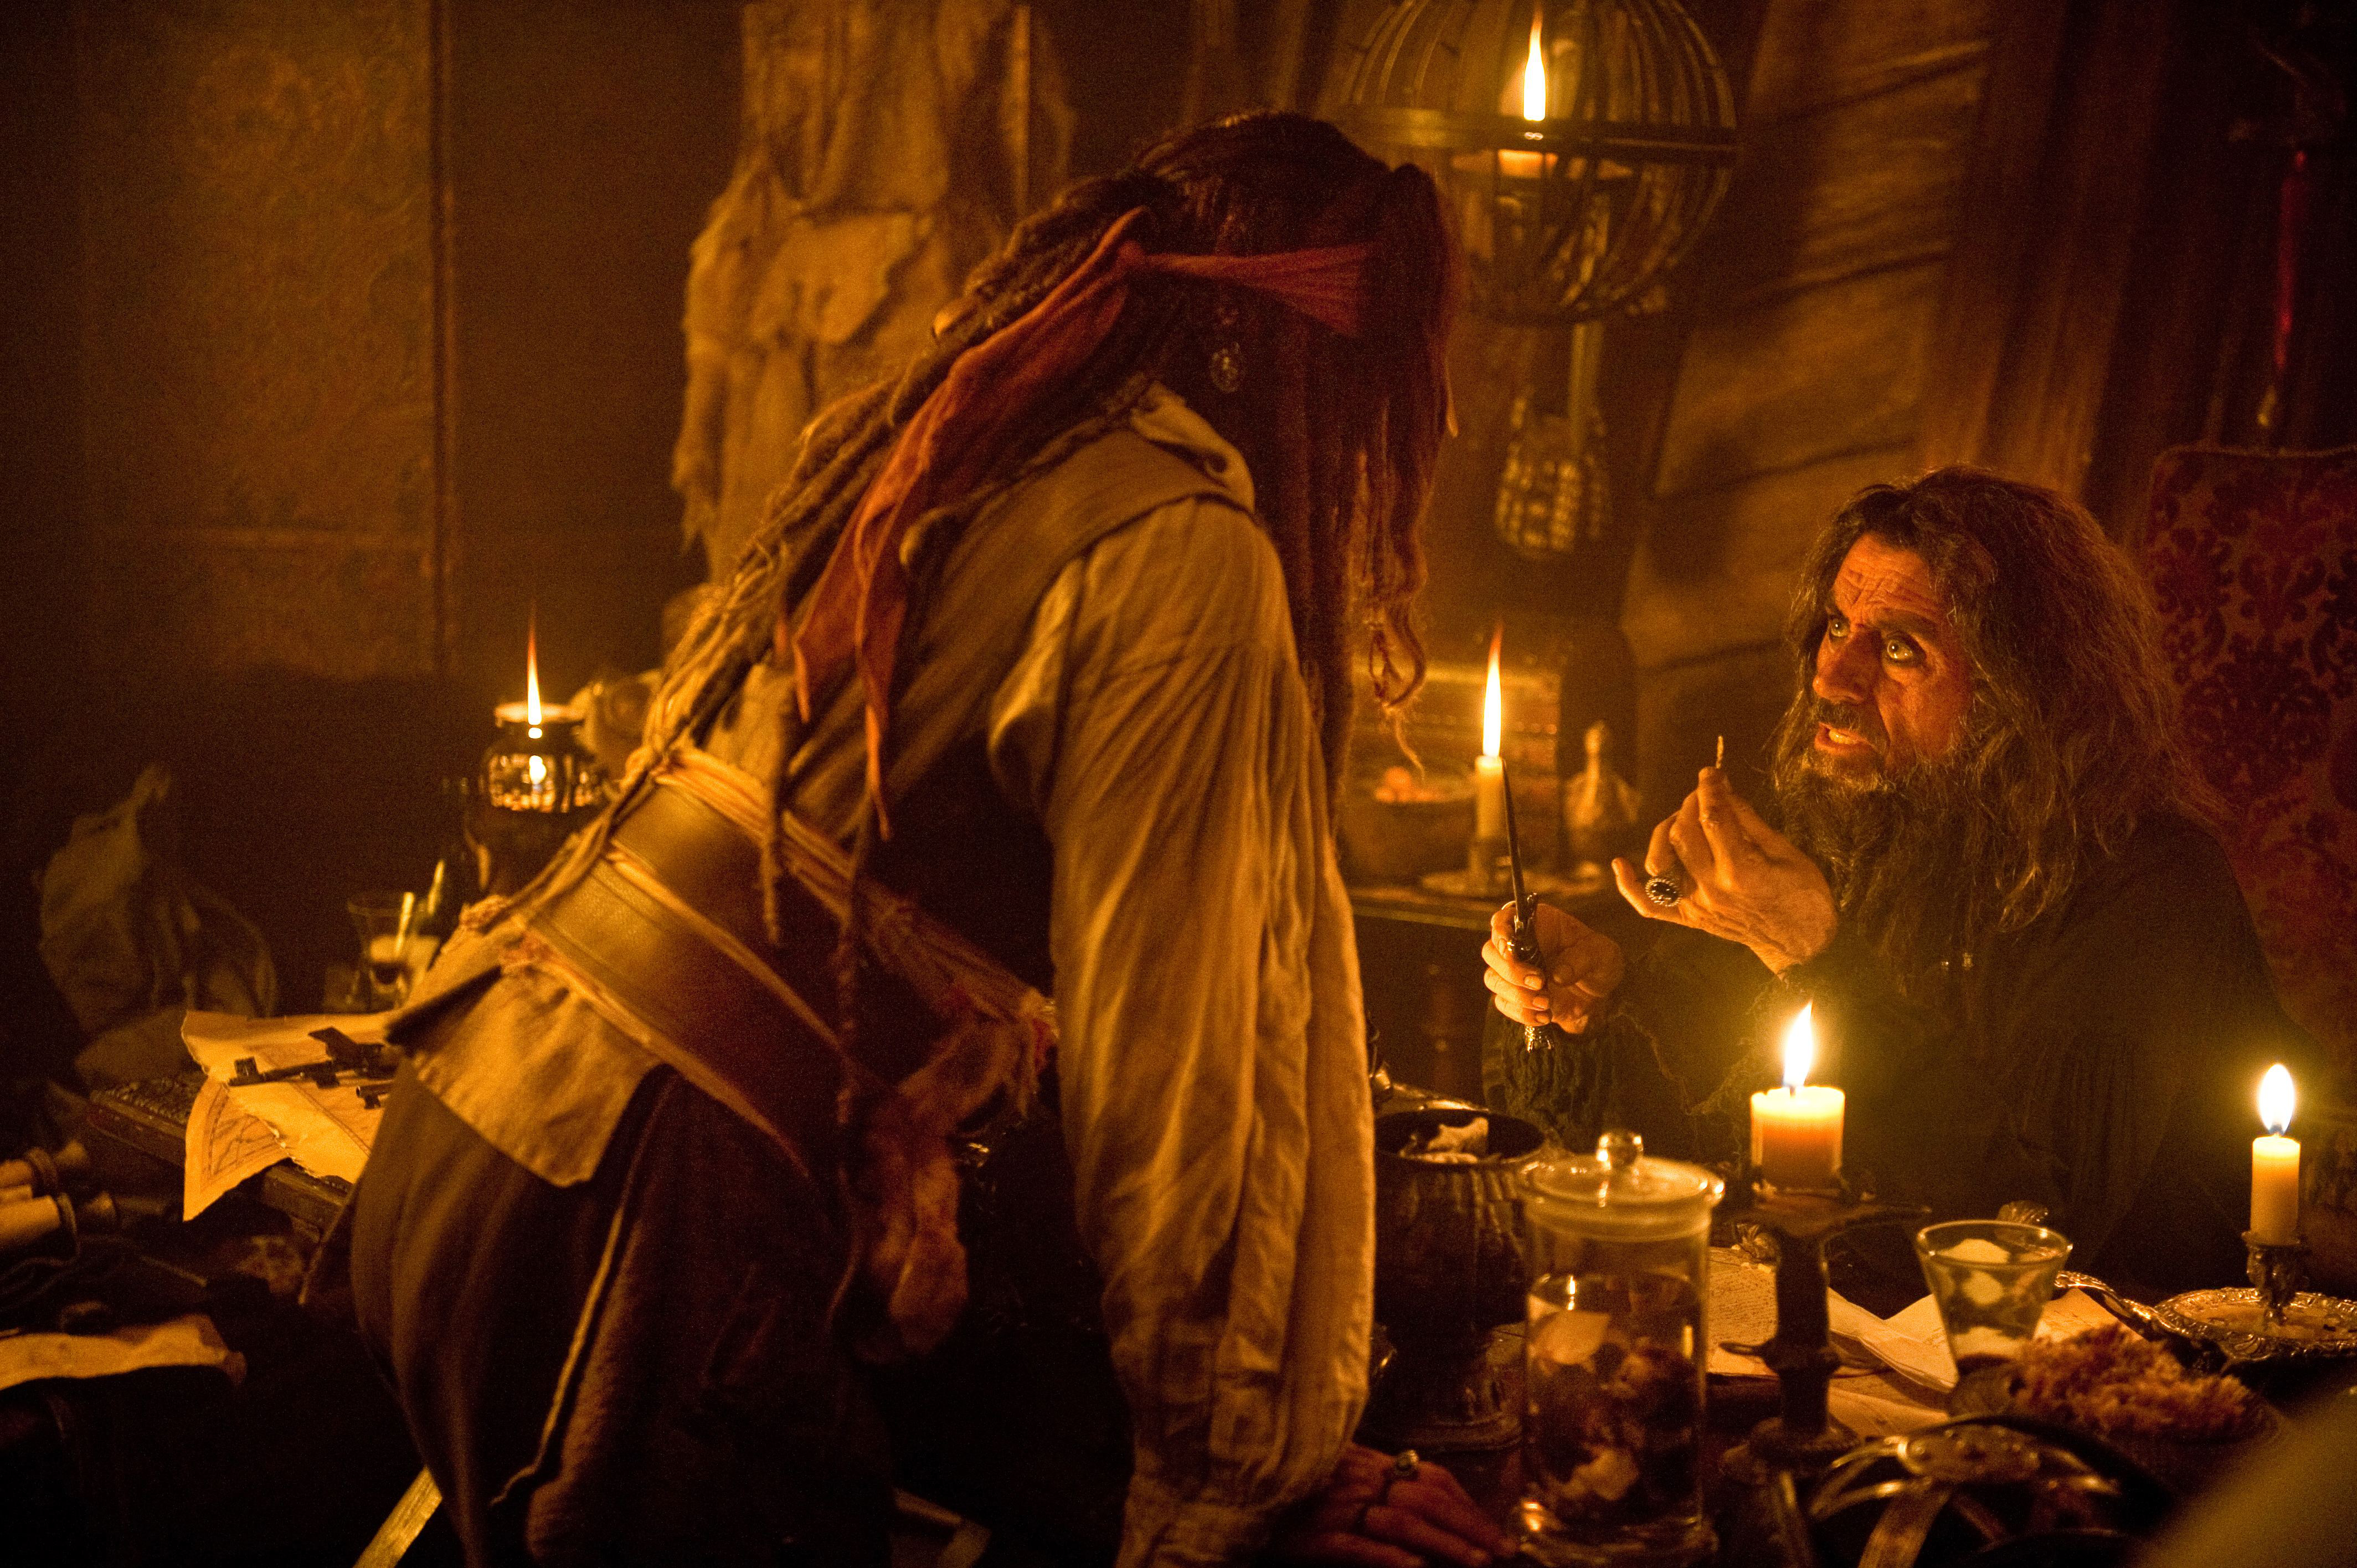 movie, pirates of the caribbean: on stranger tides, blackbeard (pirates of the caribbean), ian mcshane, jack sparrow, johnny depp, pirates of the caribbean